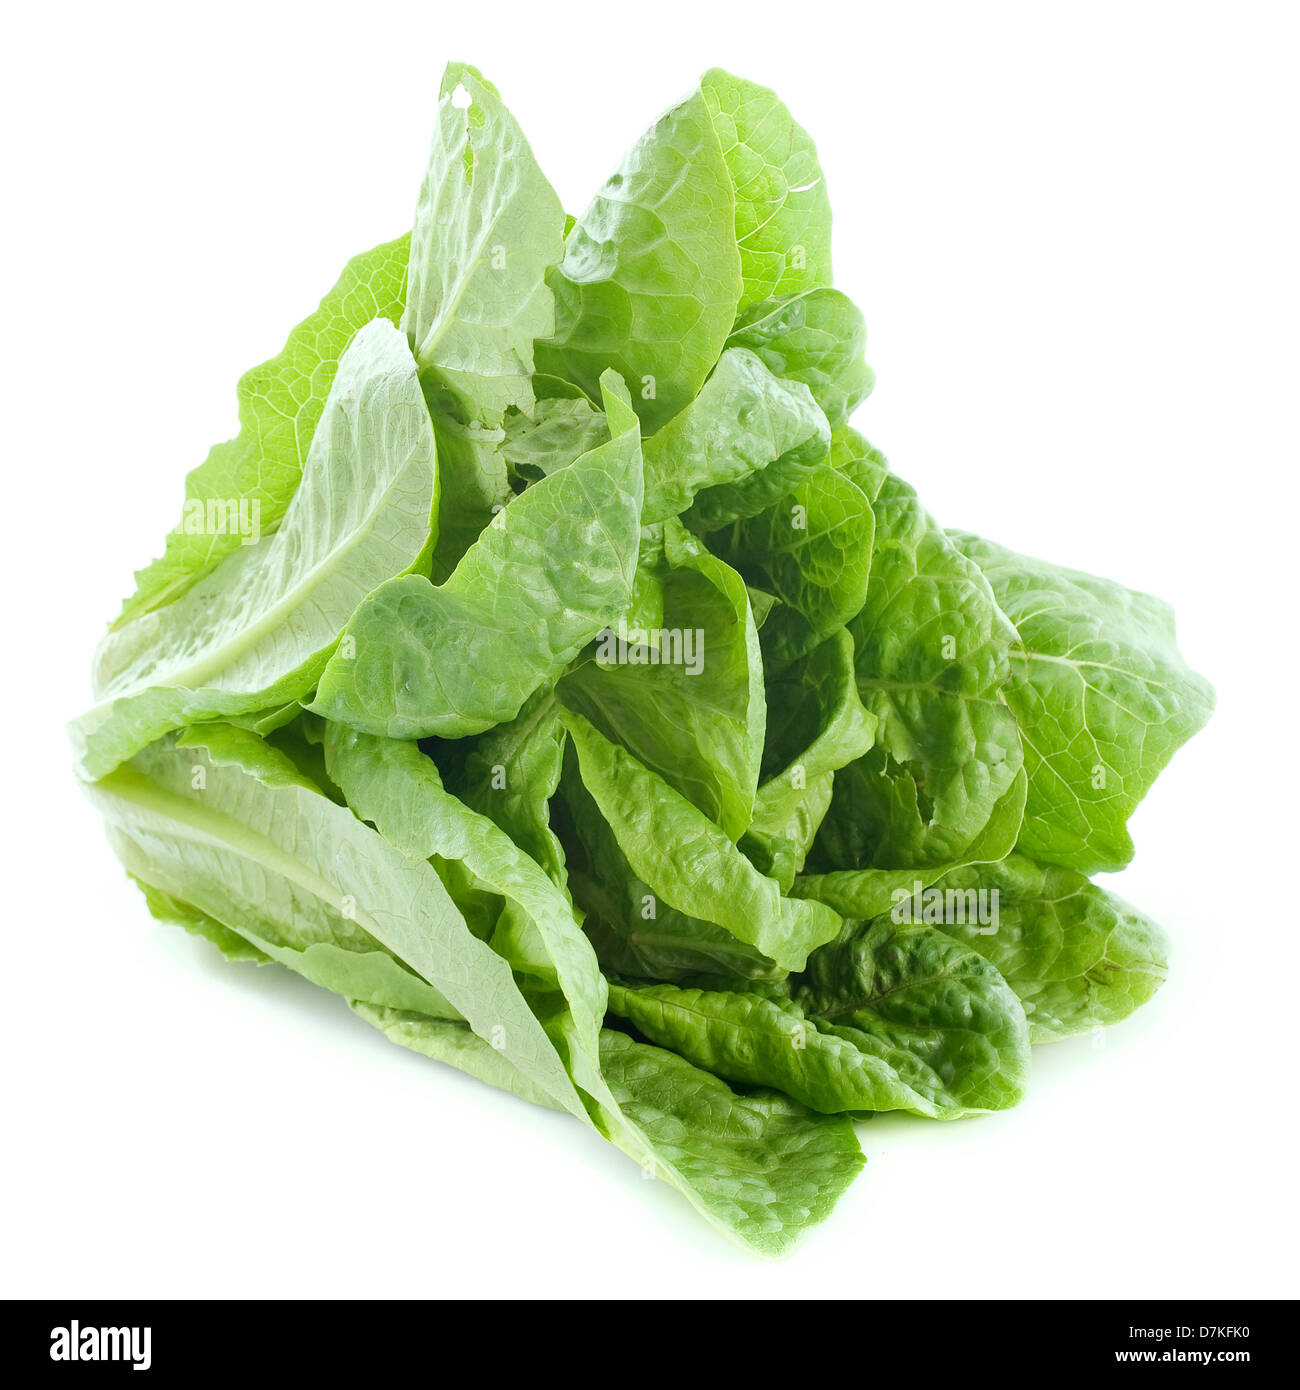 Romaine lettuce in front of white background Stock Photo